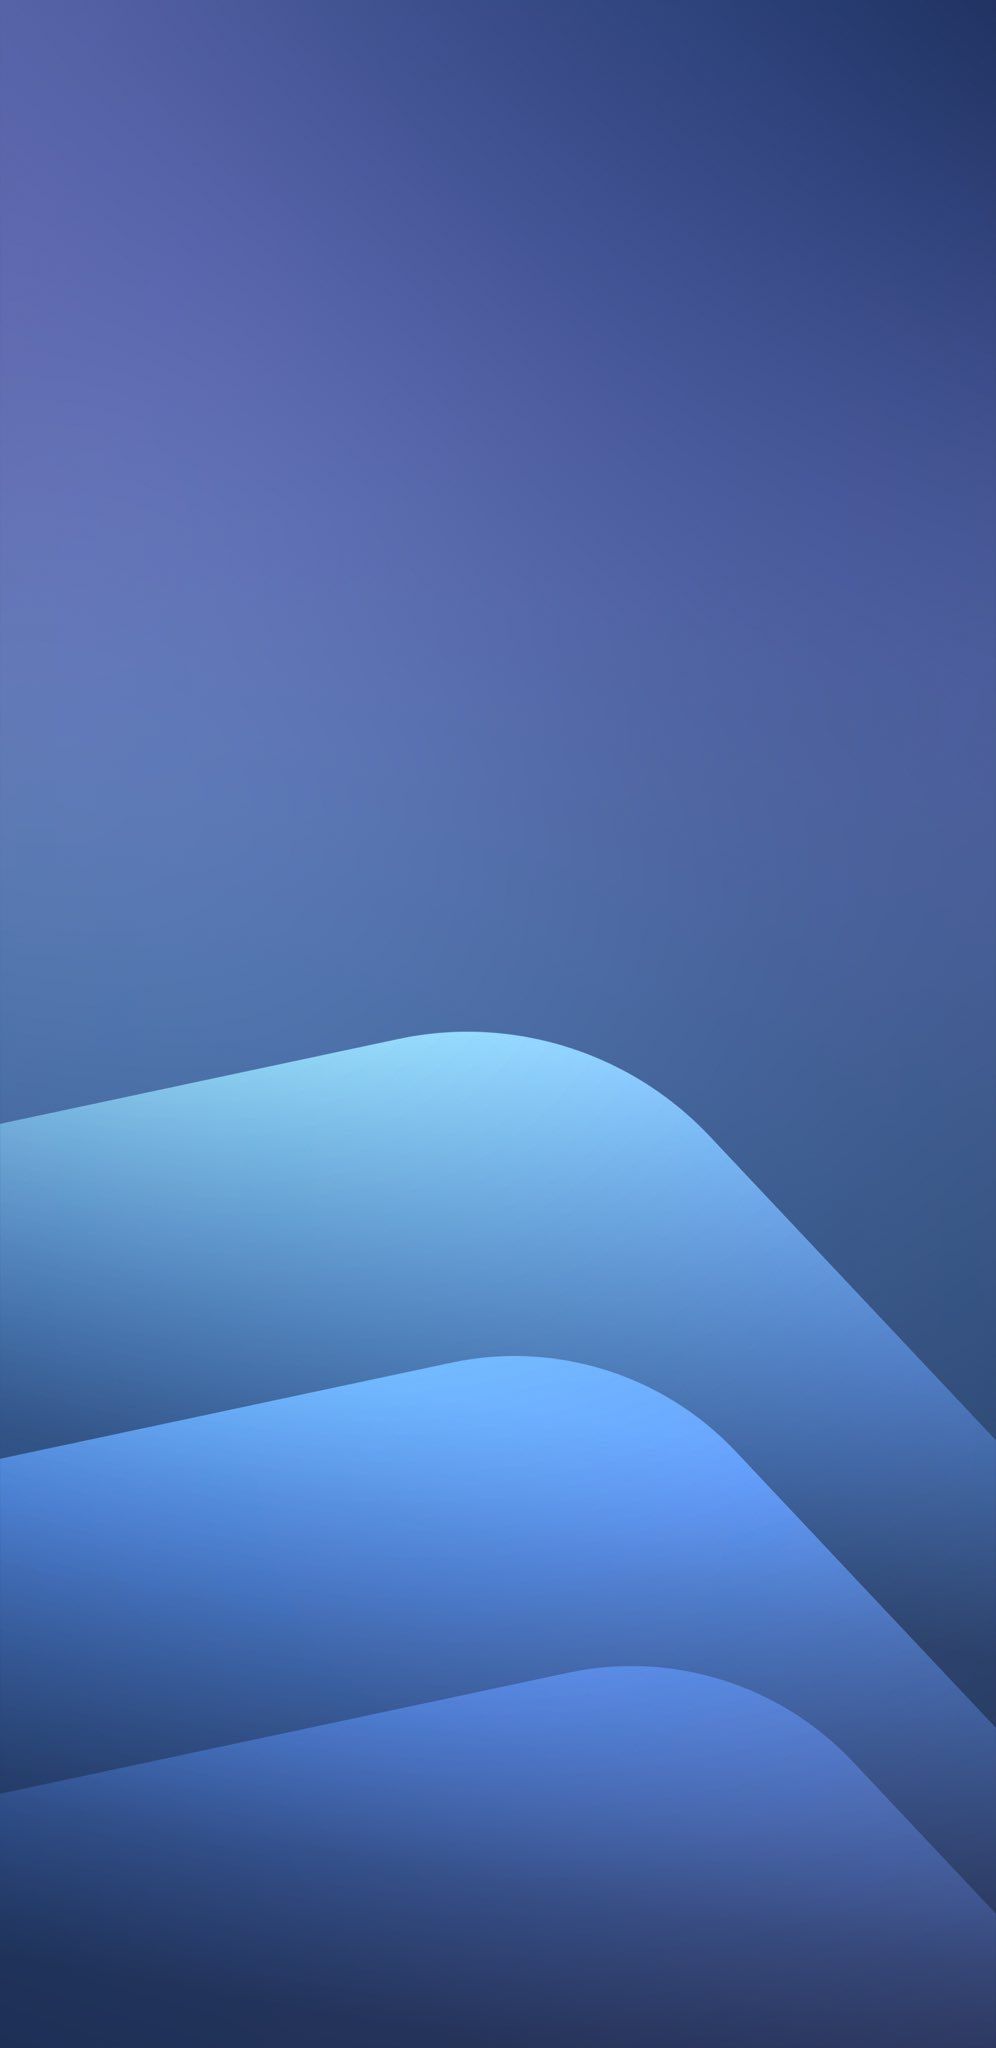 4K iPhone Blue Wallpapers - Wallpaper Cave